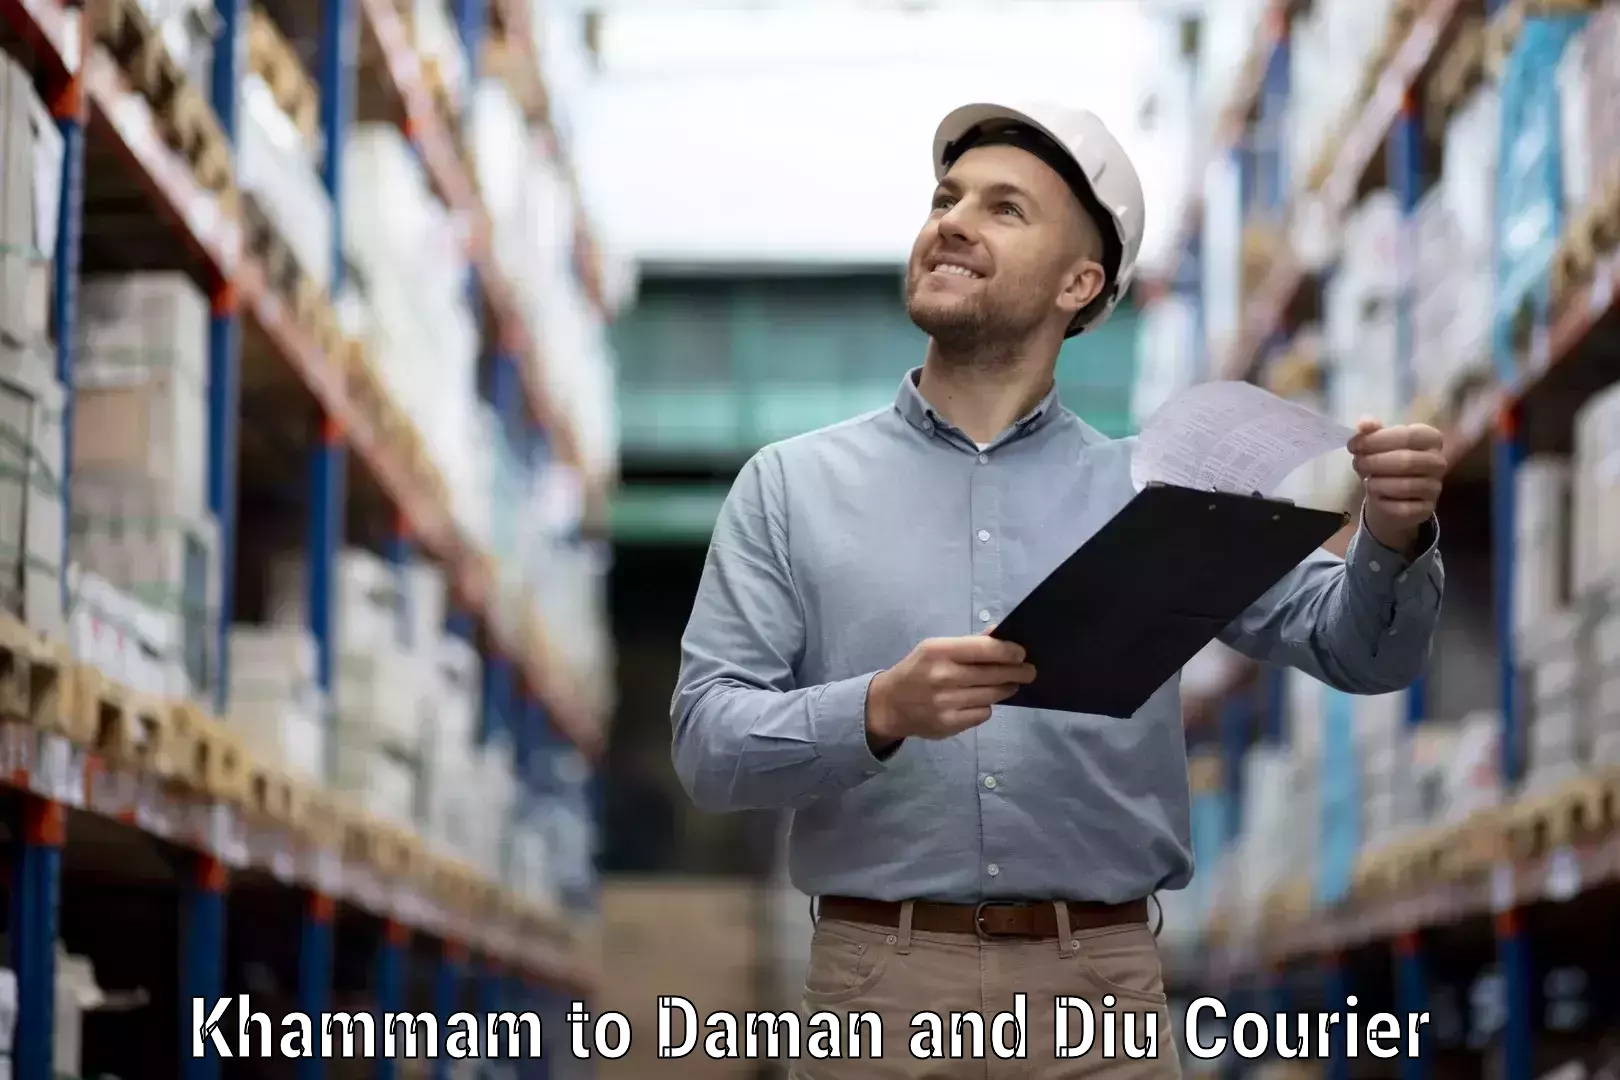 Reliable delivery network Khammam to Daman and Diu